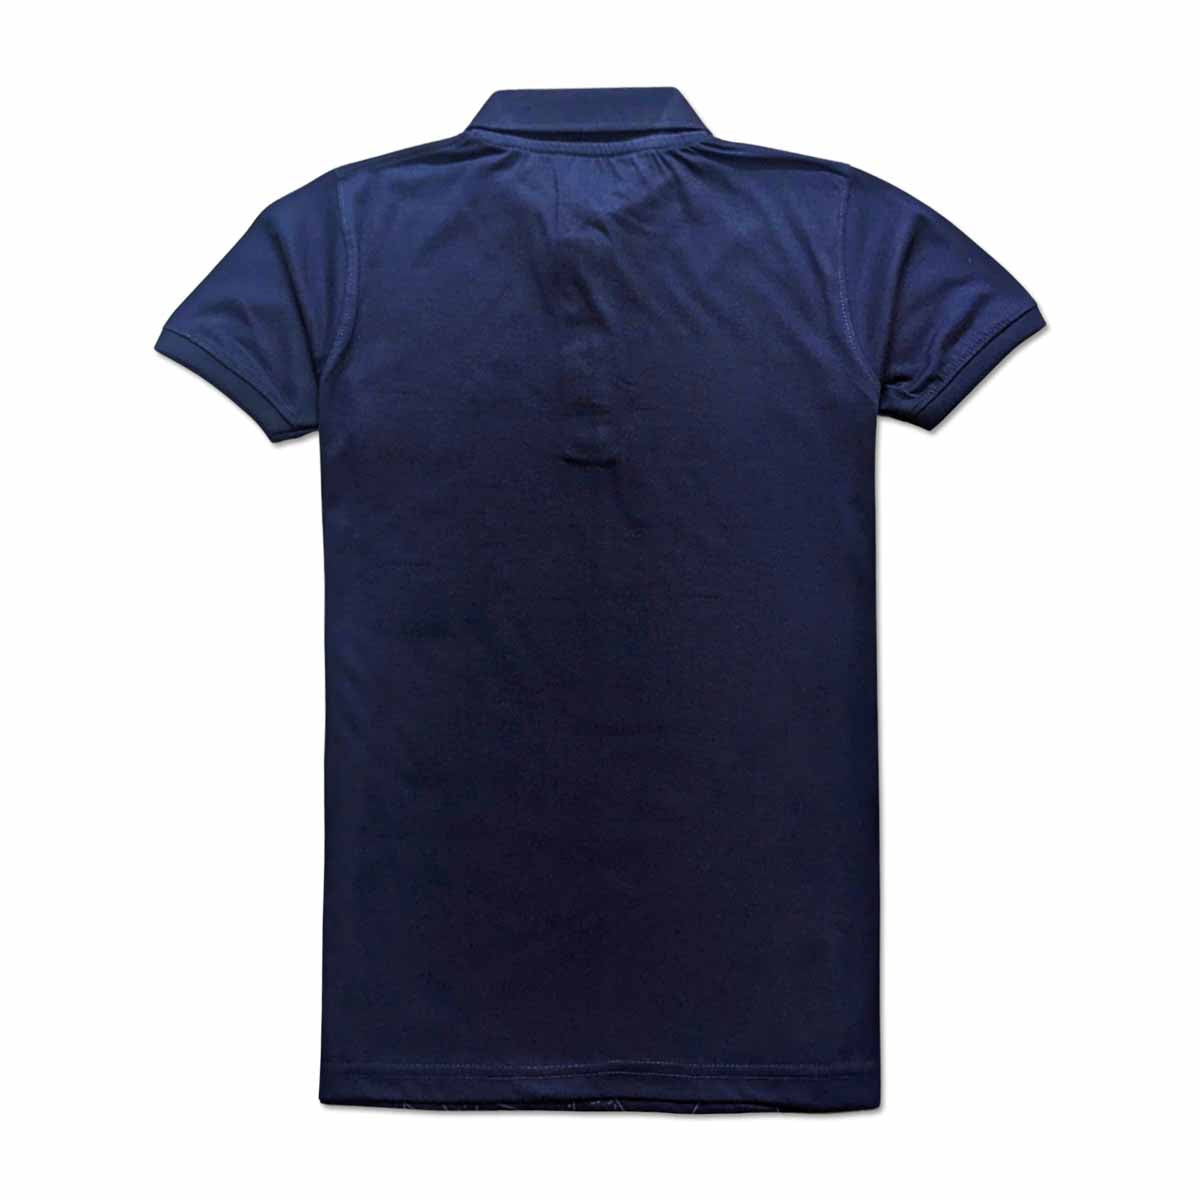 Brand Expo Premium Quality Branded Polo for Men's